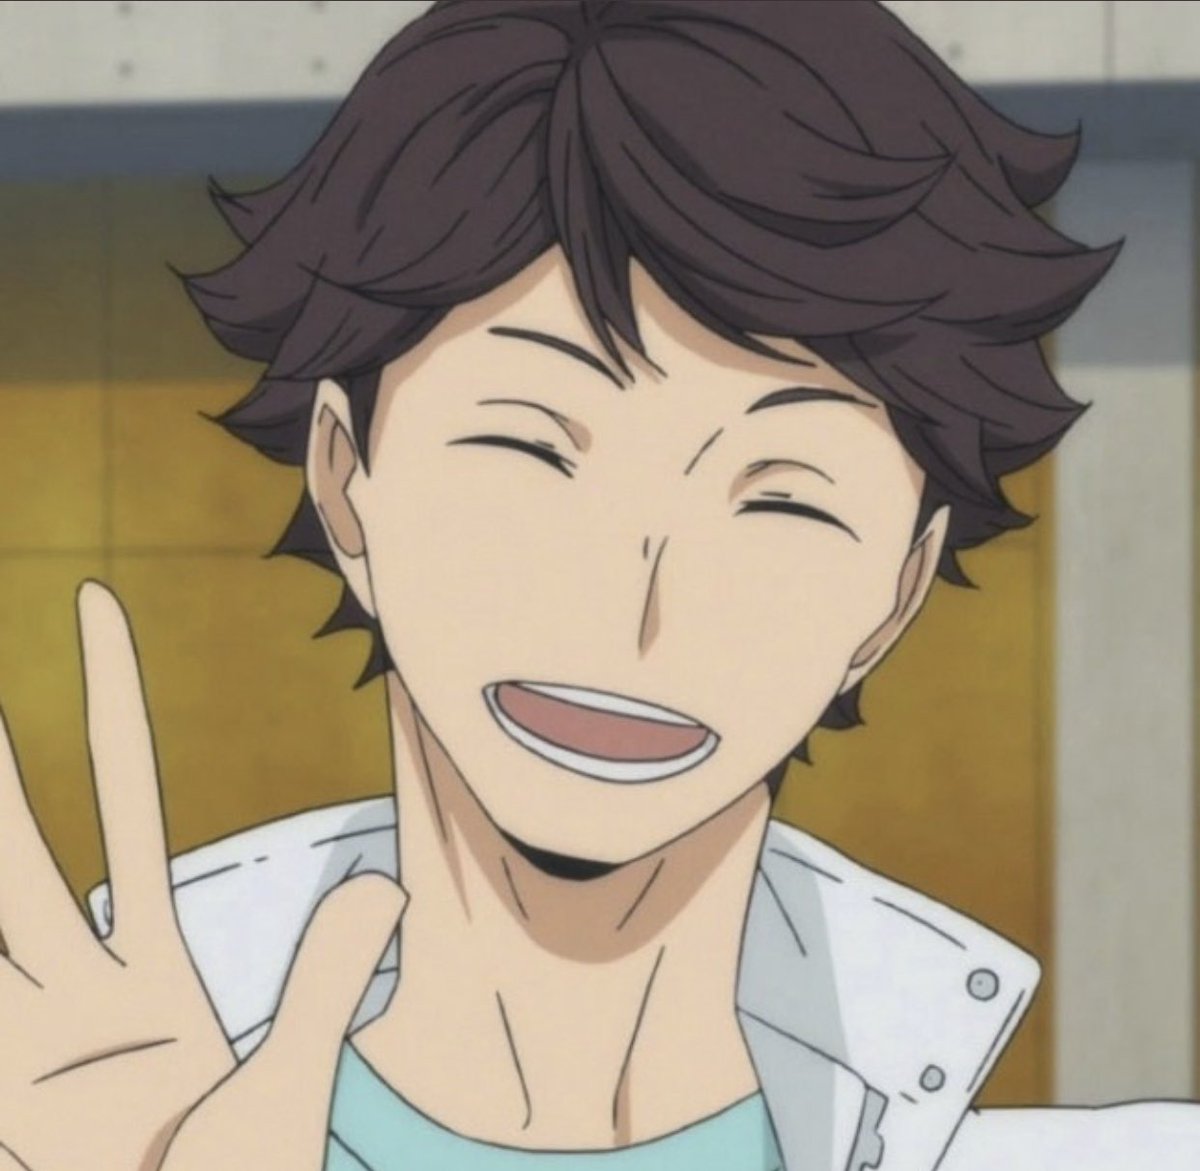 Oikawa as Rarity- spend at LEAST an hour getting ready in the morning and styling their hair- talk big, about how they’re the best at what they do, but actually have INTENSE self-doubt about their abilities/talent - pretentious attitude ofc